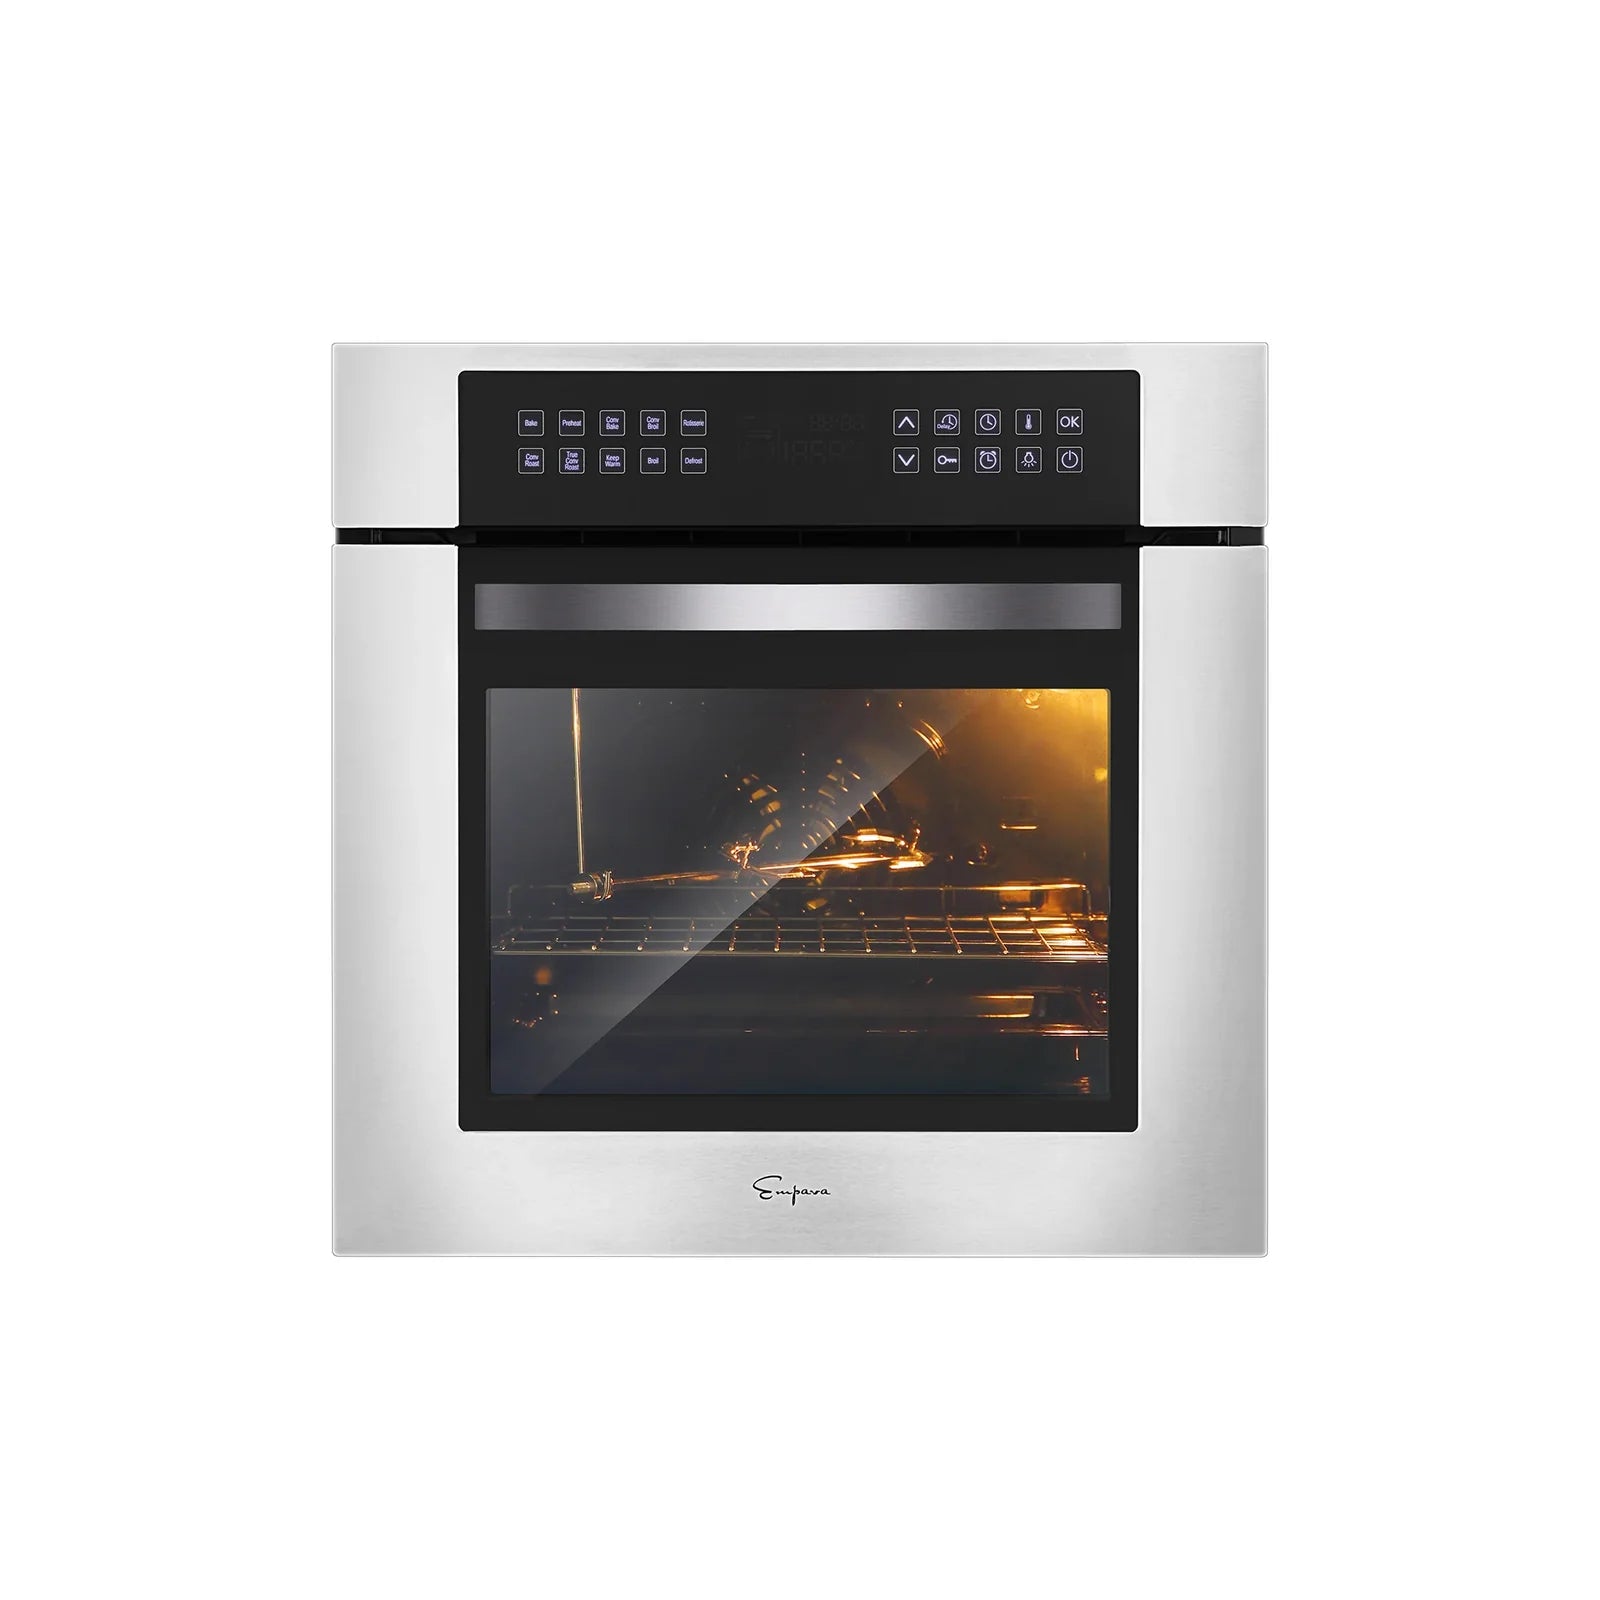 Empava 24" Single Electric Wall Oven - 2.3 cu. ft, EMPV-24WOC02